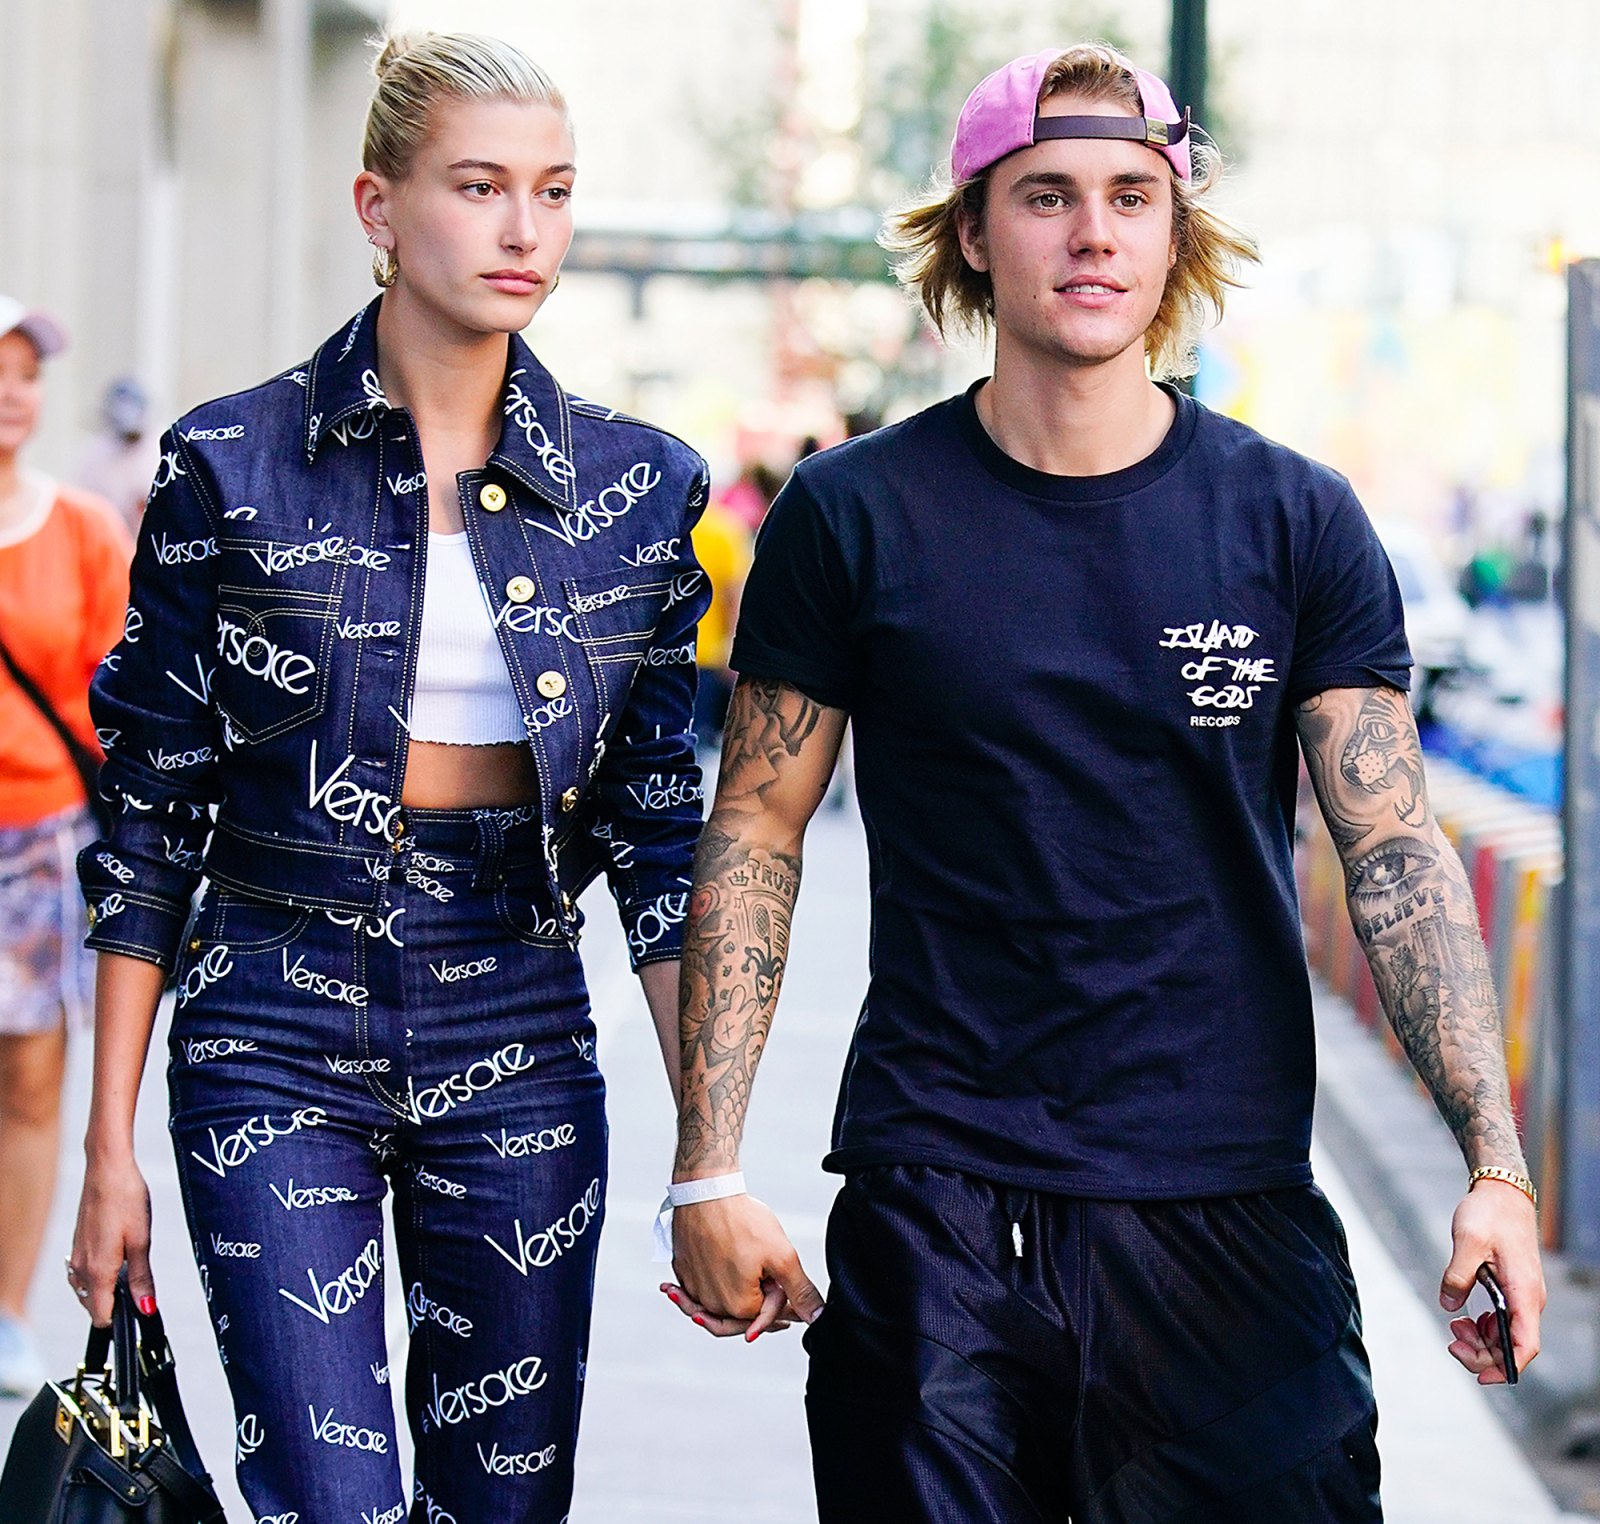 Hailey Baldwin Wears Engagement Ring After Justin Bieber Proposal Pic